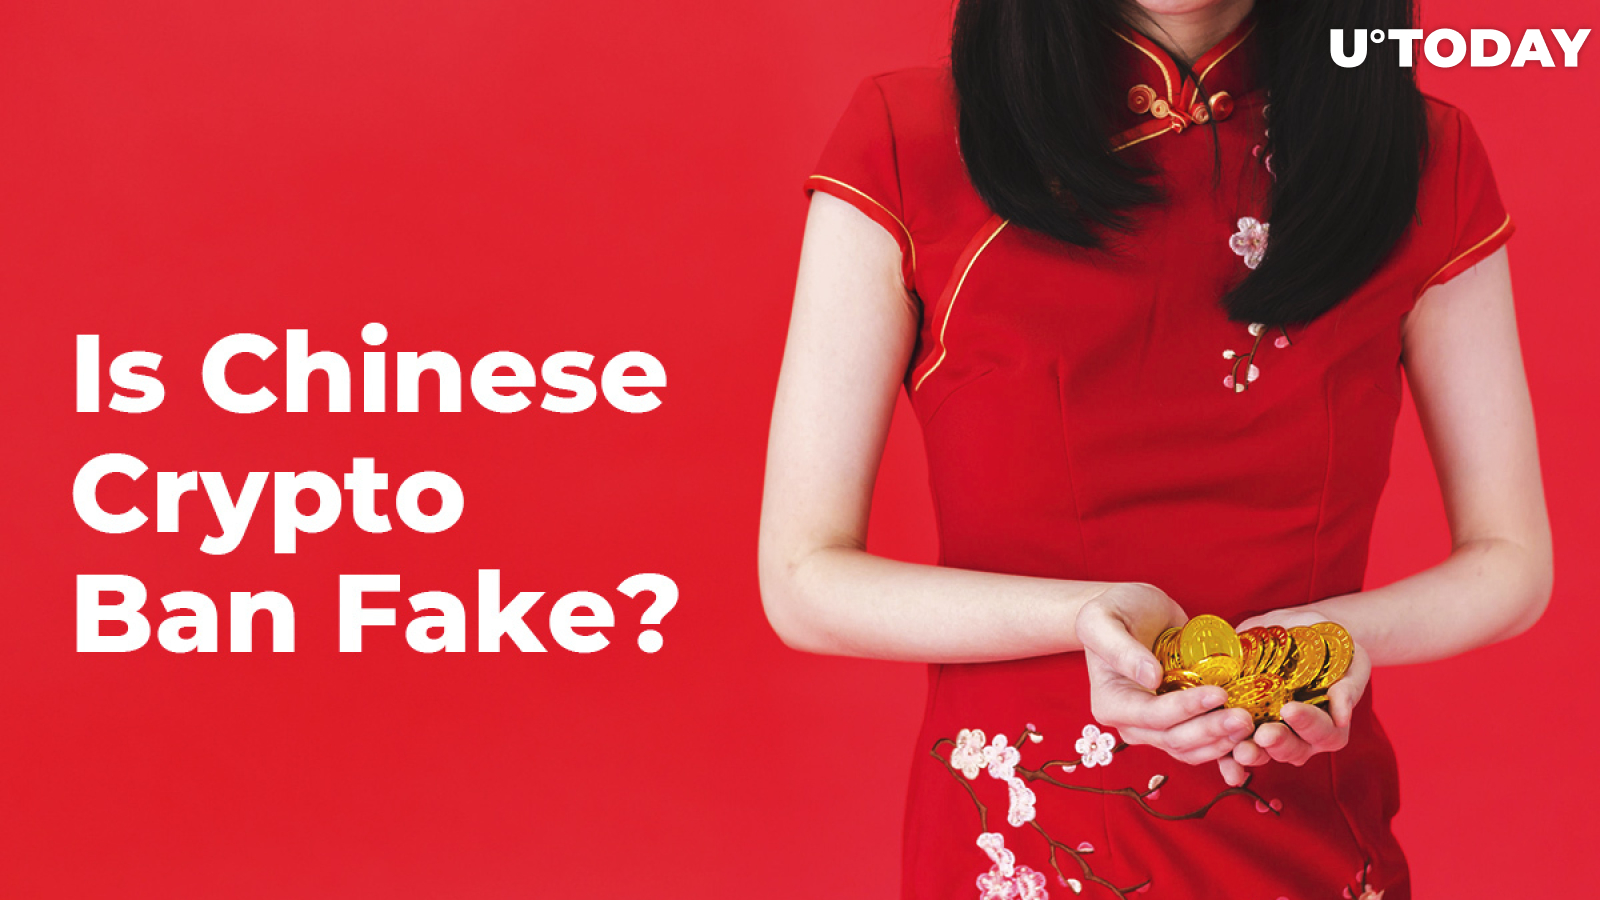 Is the Chinese Crypto Ban Fake? Owning BTC and OTC Trading Are Allowed, Says Expert